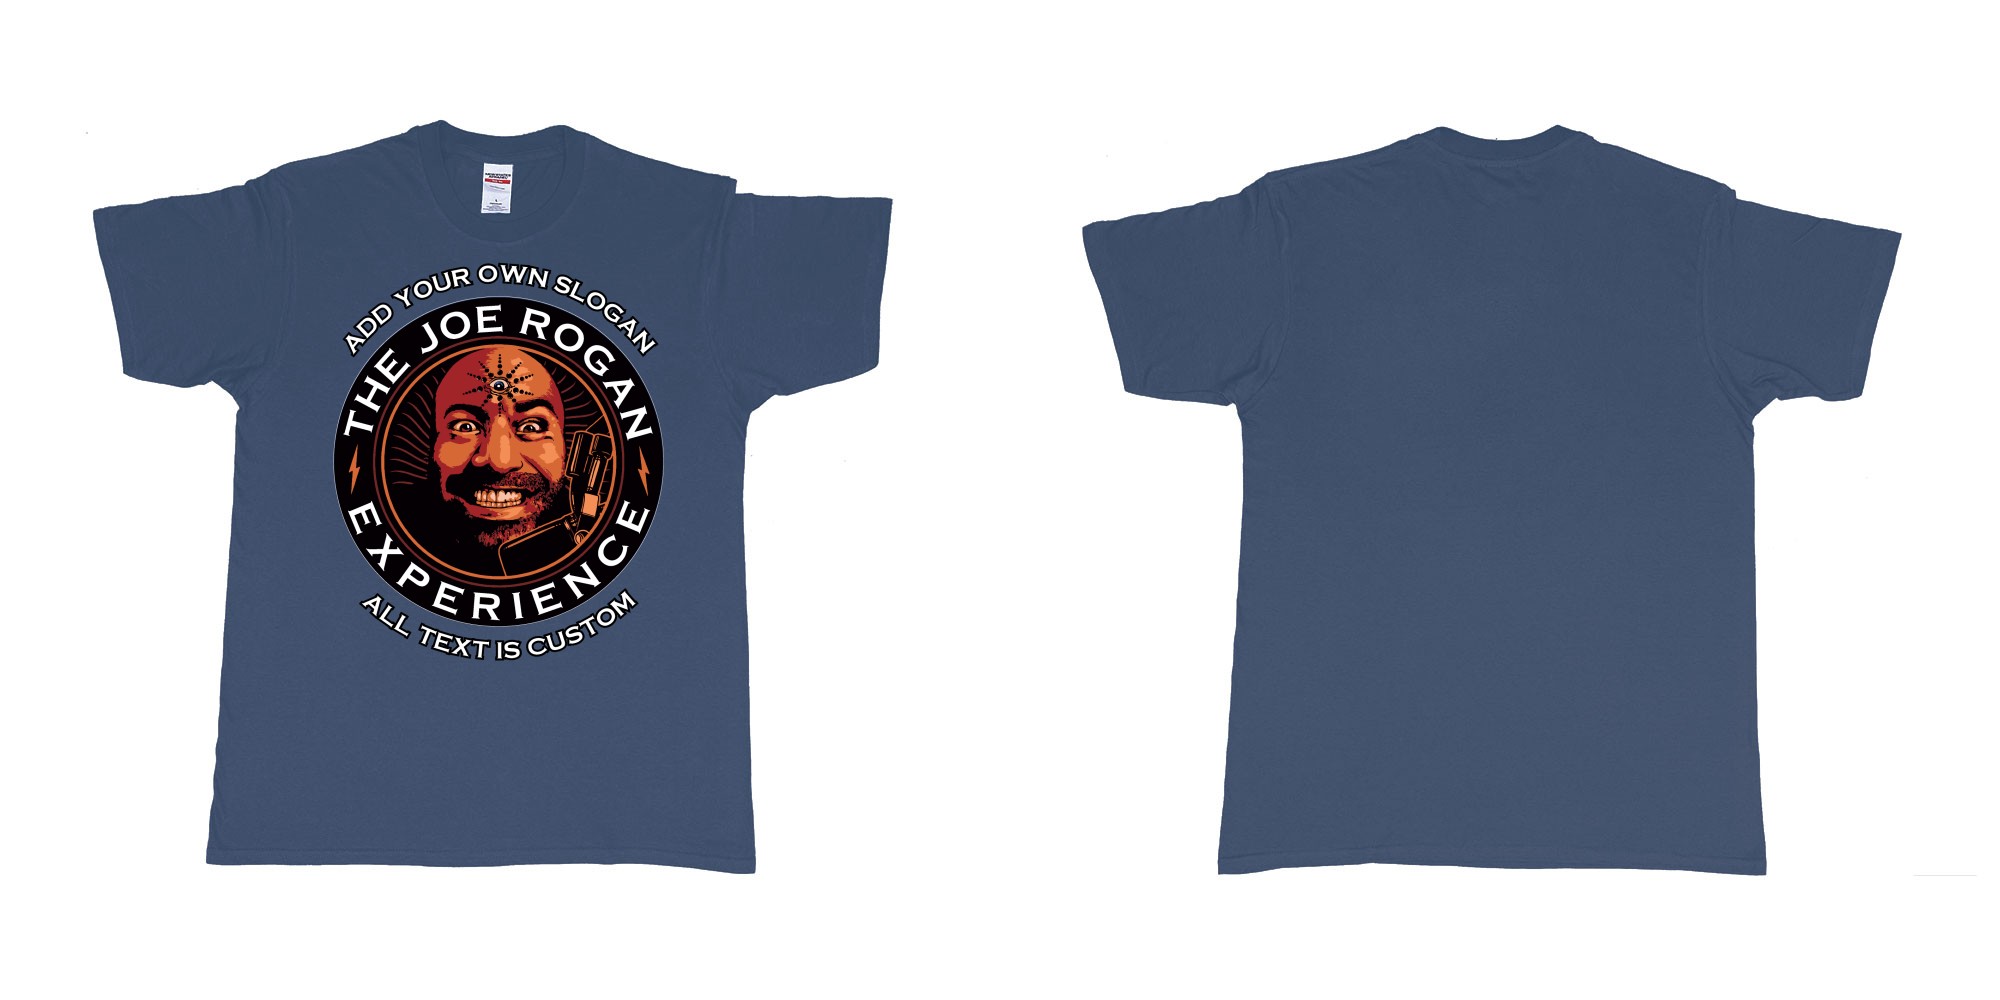 Custom tshirt design the joe rogan experience custom tshirt in fabric color navy choice your own text made in Bali by The Pirate Way